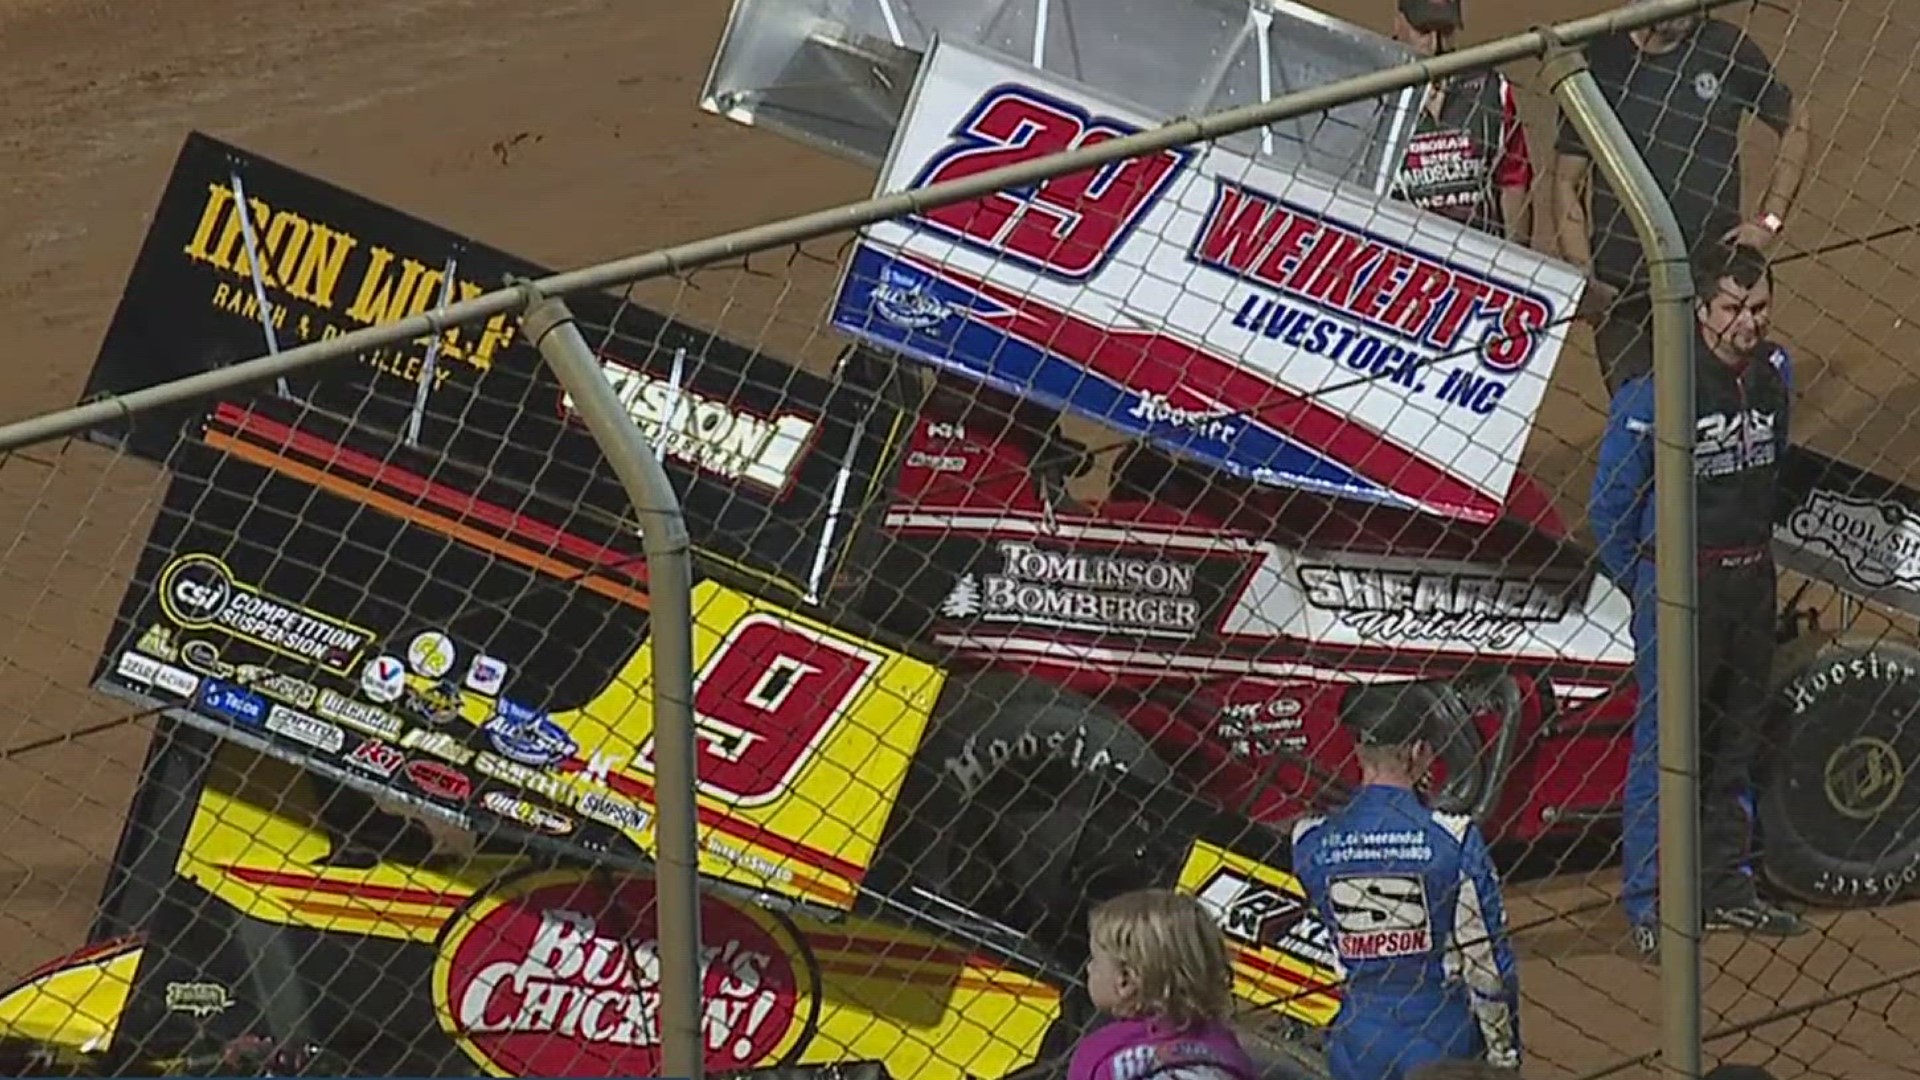 Invaders swept the three-day race weekend at Port Royal.